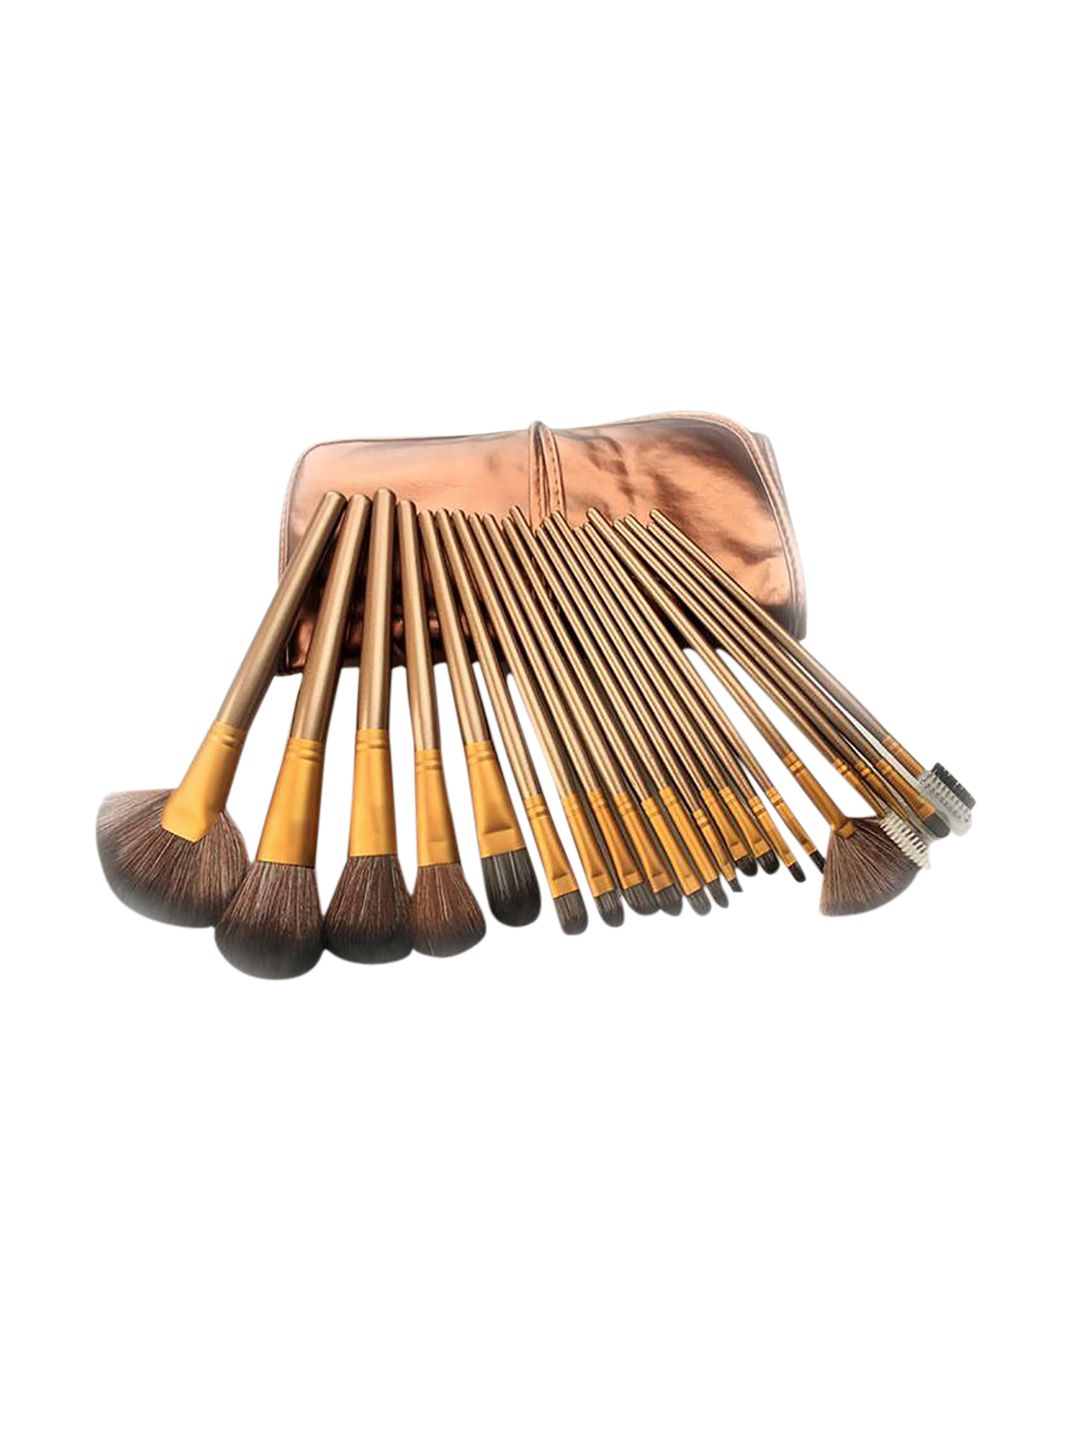 Ronzille Set of 24 Gold-Toned Makeup Brushes Price in India